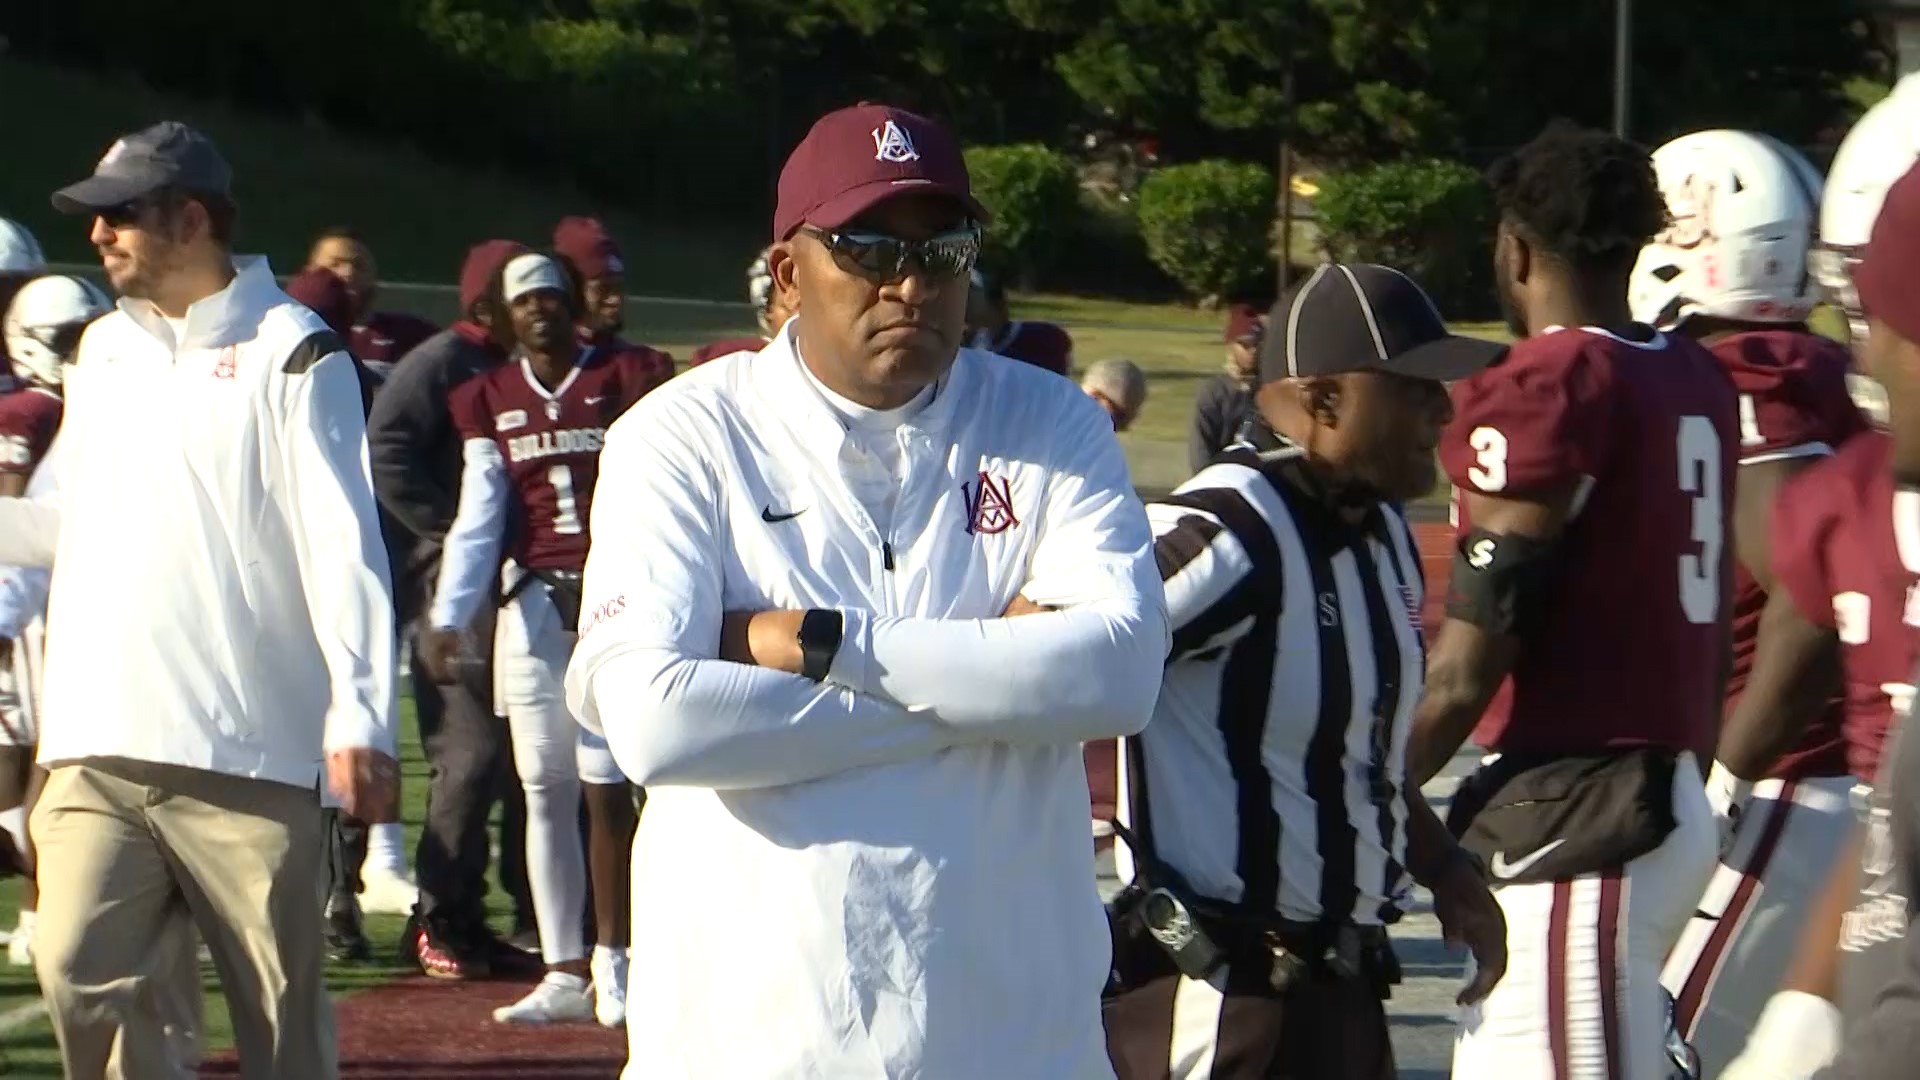 On October 16th, Connell Maynor & the Alabama A&M Bulldogs will travel to St. Louis to face Arkansas-Pine Bluff in the River City HBCU Classic